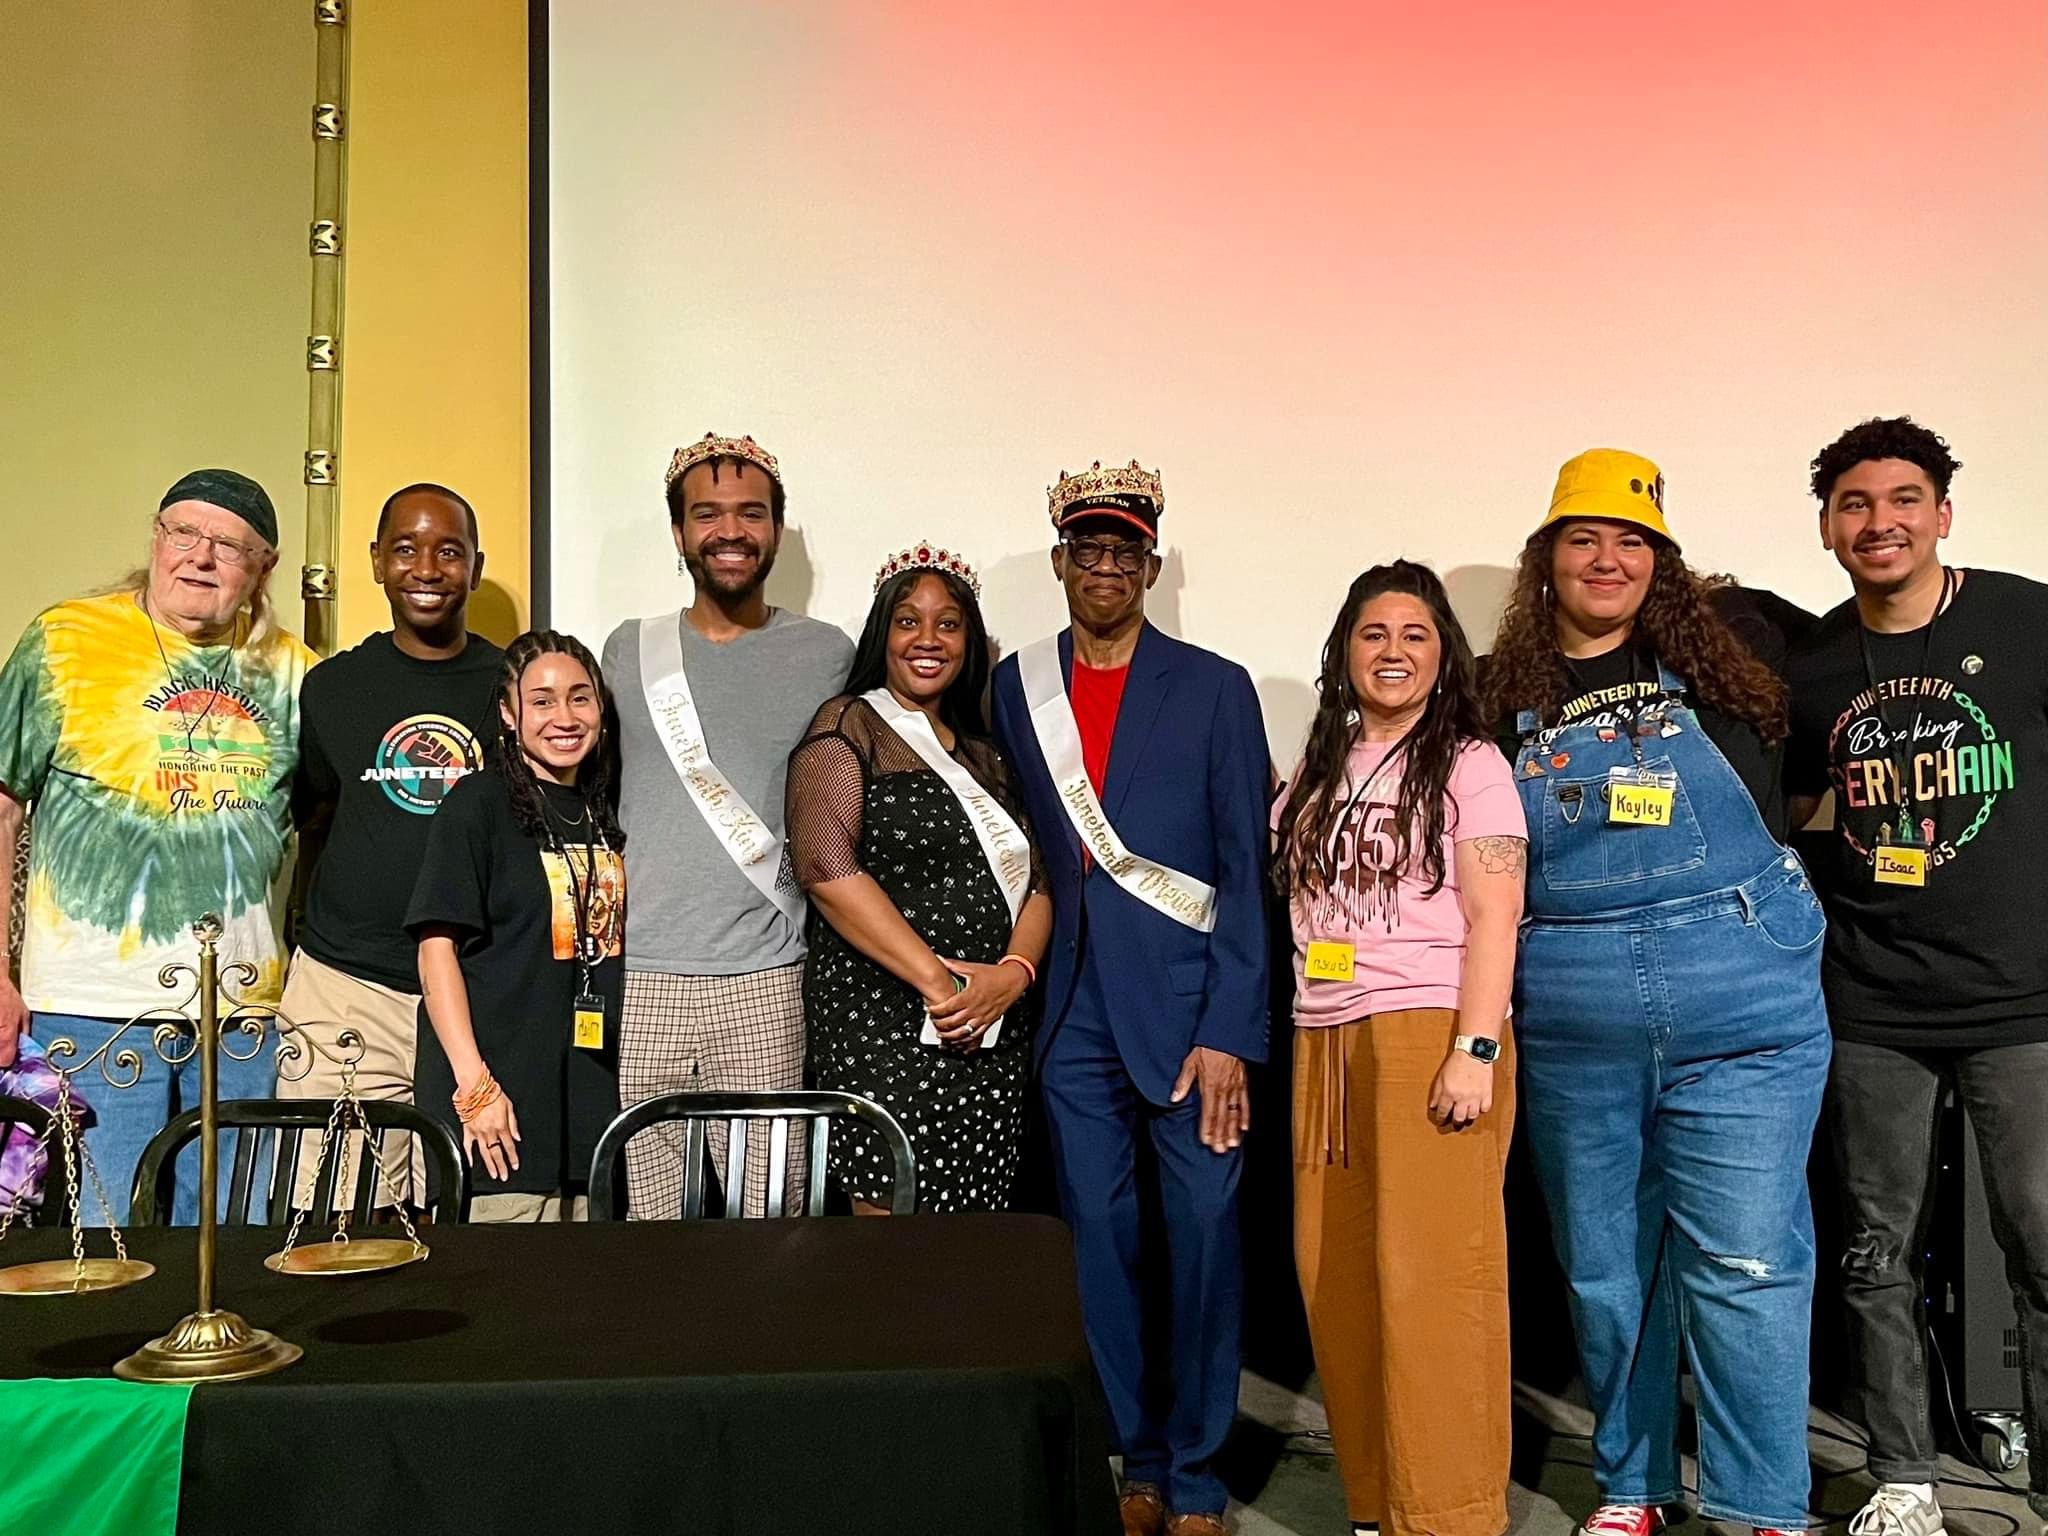 Members of the Wausau Juneteenth event committee are pictured with those awarded as “Dreamers” for the event – those who embody the hope and aspirations of previous generations while being recognized for their work for the Black community. Pictured are Ron Alexander, William Harris, Miah Medina, Marcus Snow (Dreamer), Cassandra Mcgowin (Dreamer), Charles Sanders (Dreamer), Gwen Taylor, McColley and Isaac McColley.